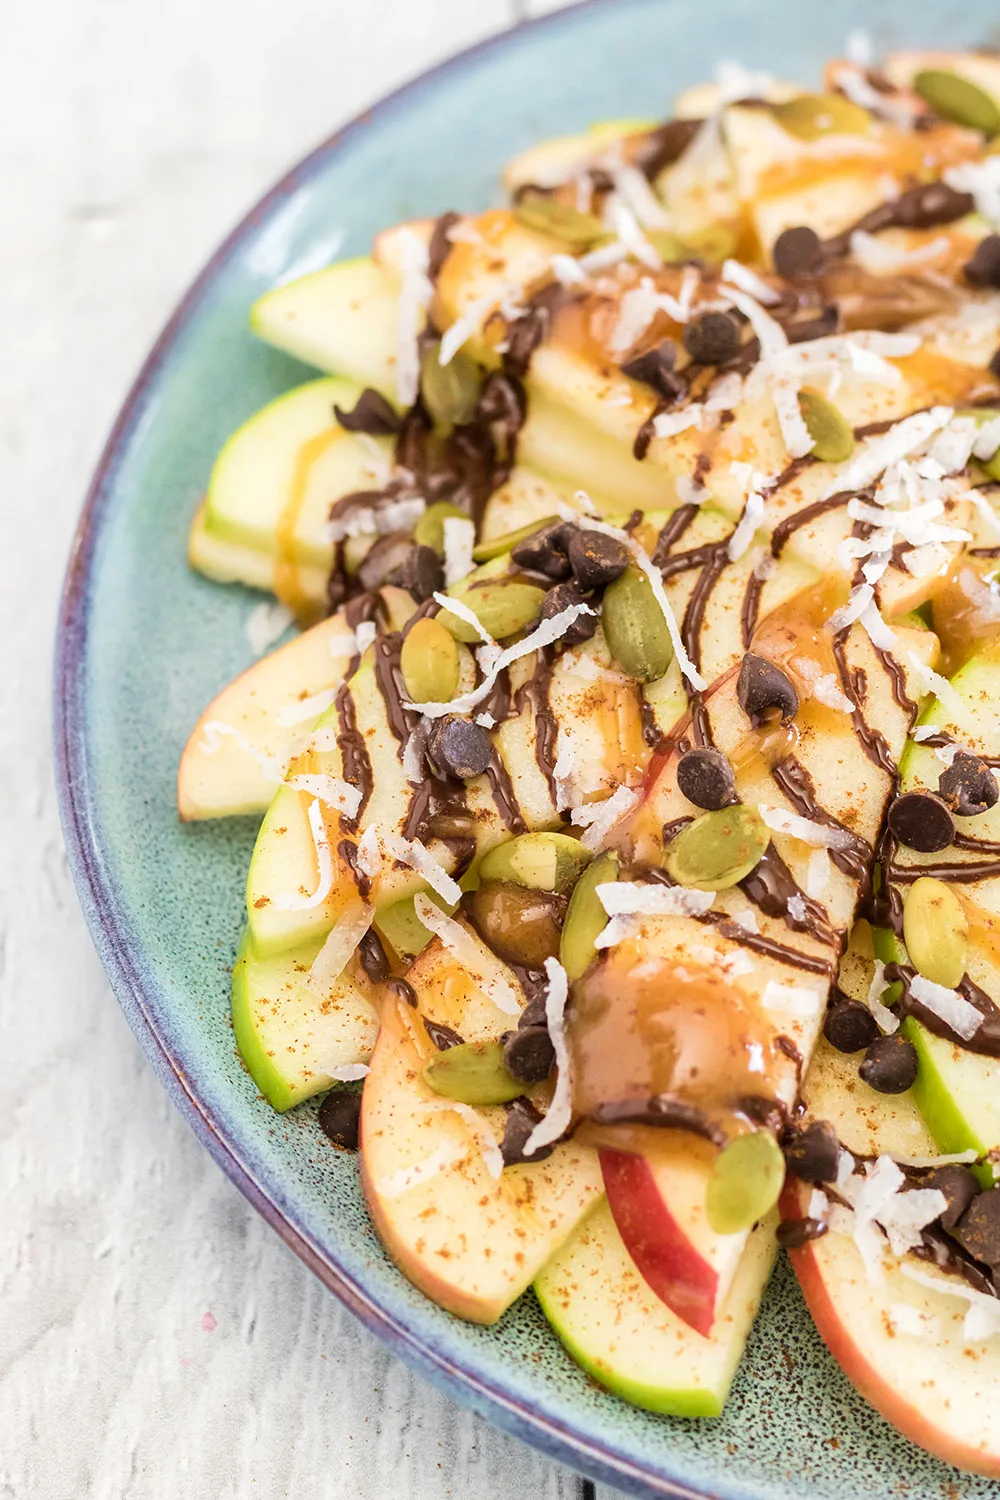 Green and red apple slices on a plate topped with, chocolate, caramel, nuts, and toppings.